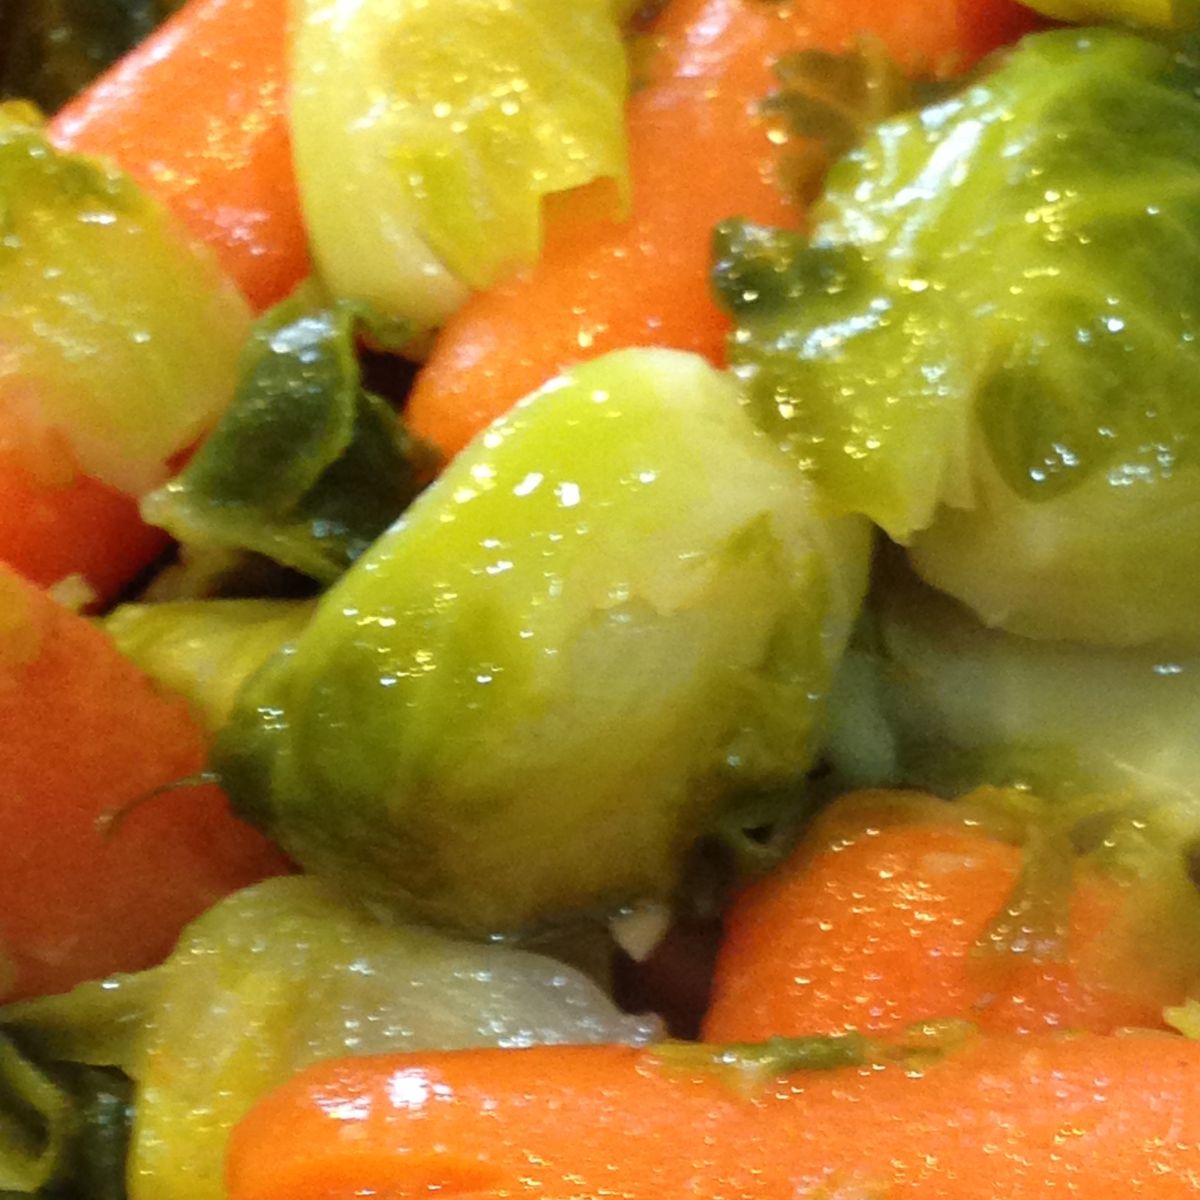 Brussels sprouts and carrots